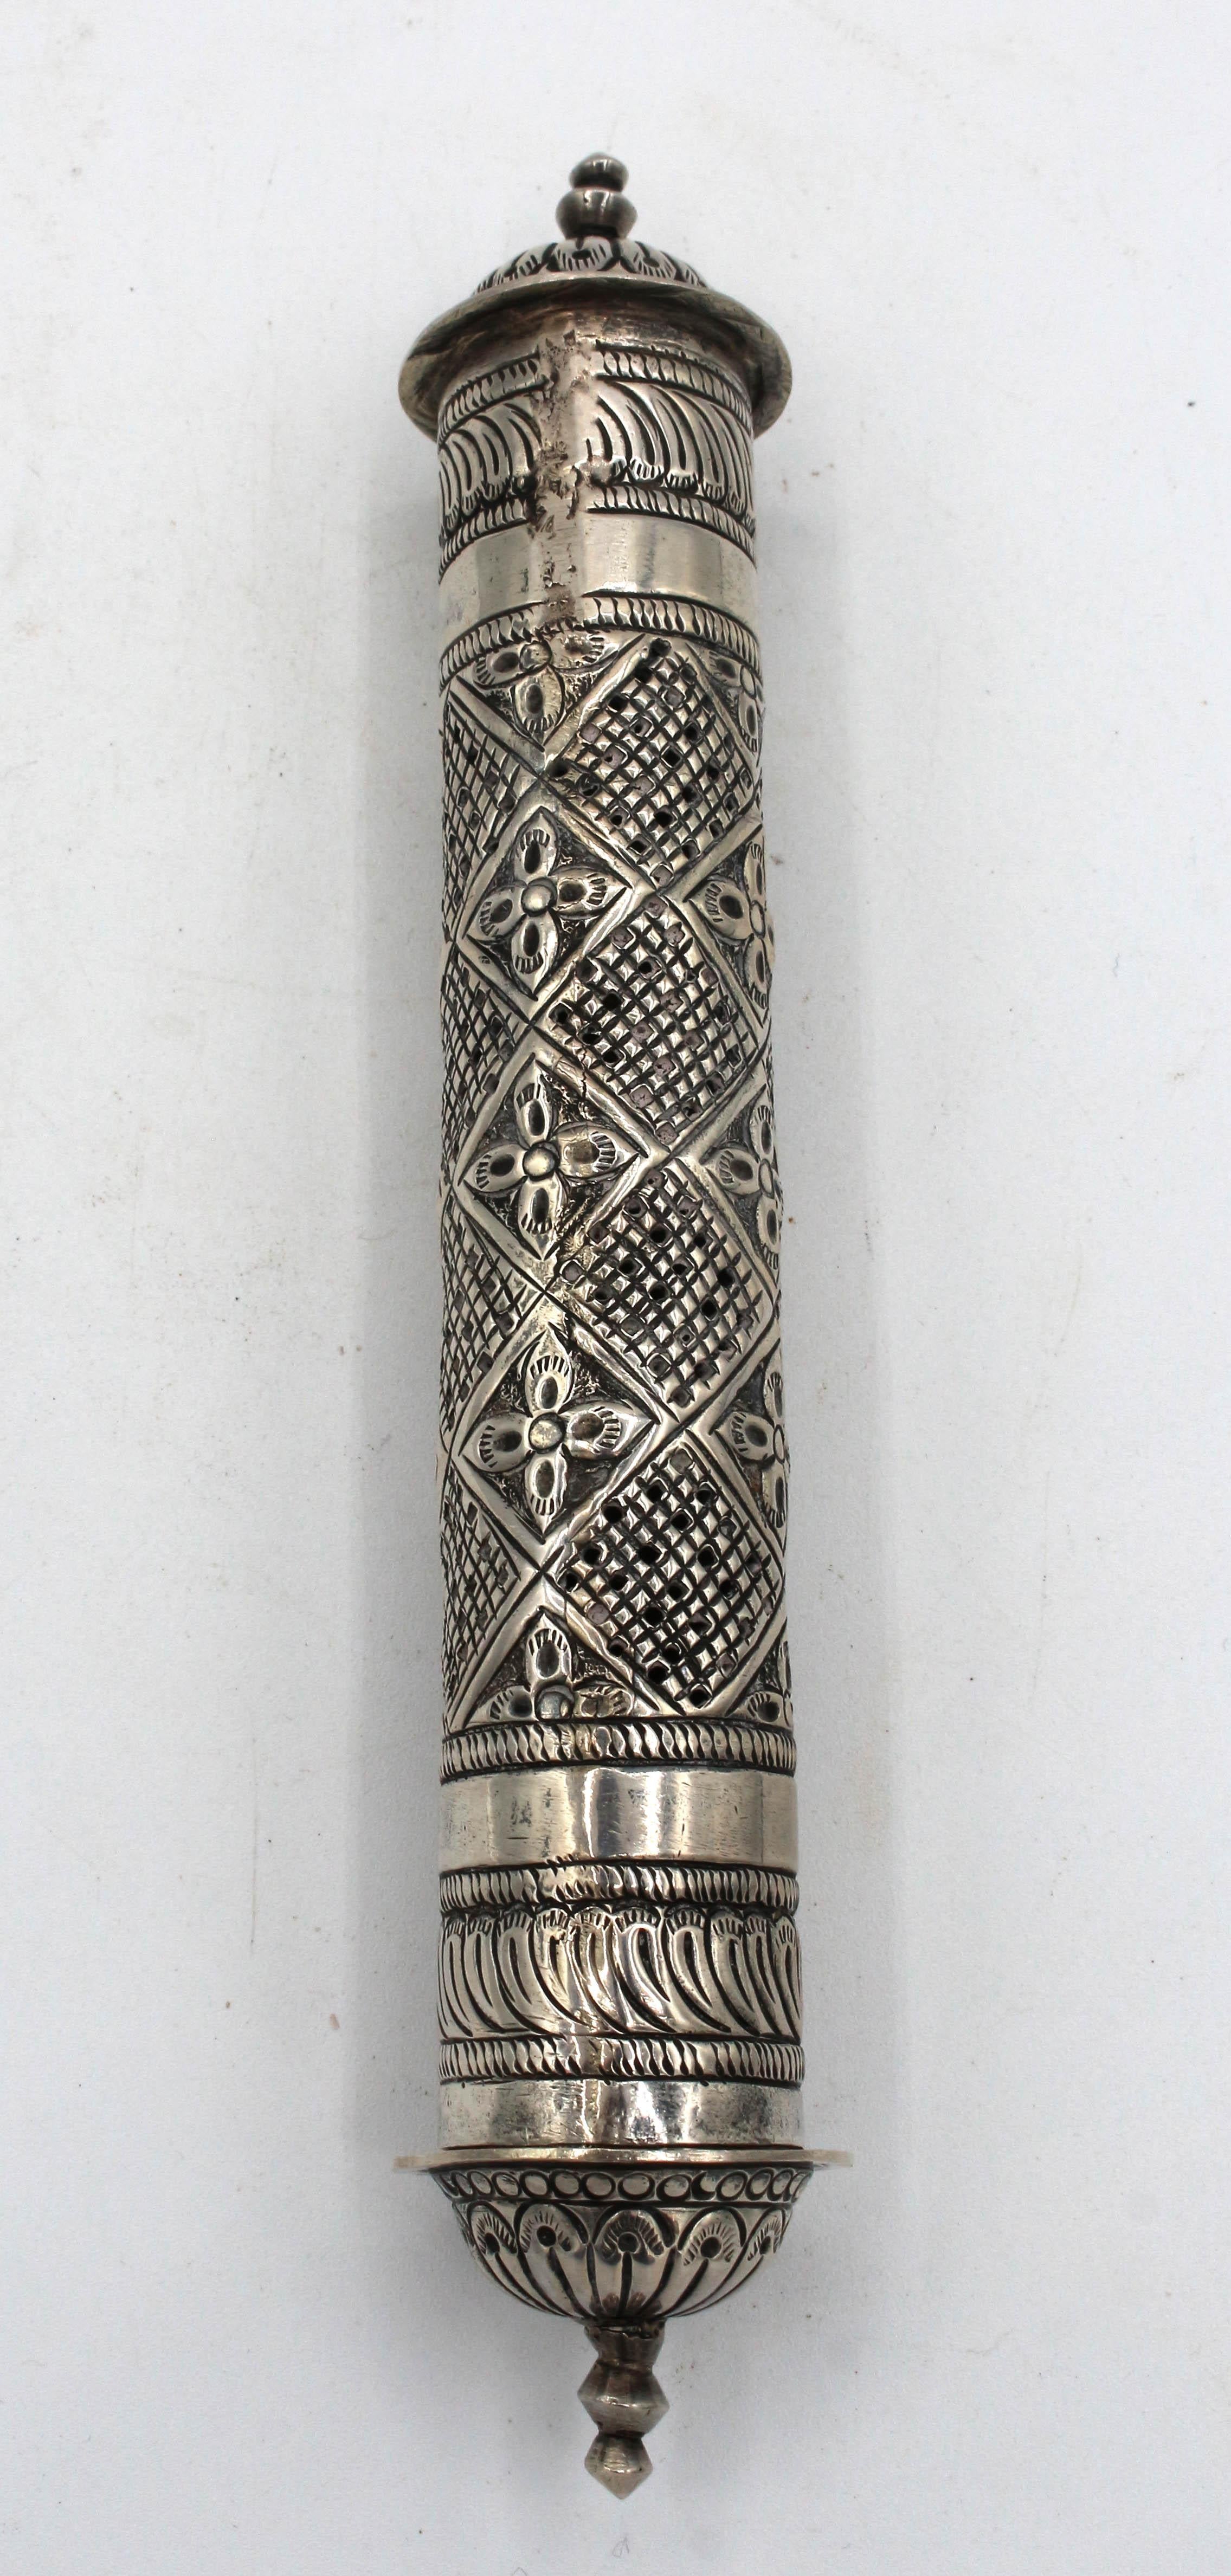 Handcrafted solid silver Indo-Persian scroll carrier for messages. Late 19th century. Provenance: Raj officer in India by descent to present. 5.40 troy oz.
8 5/8